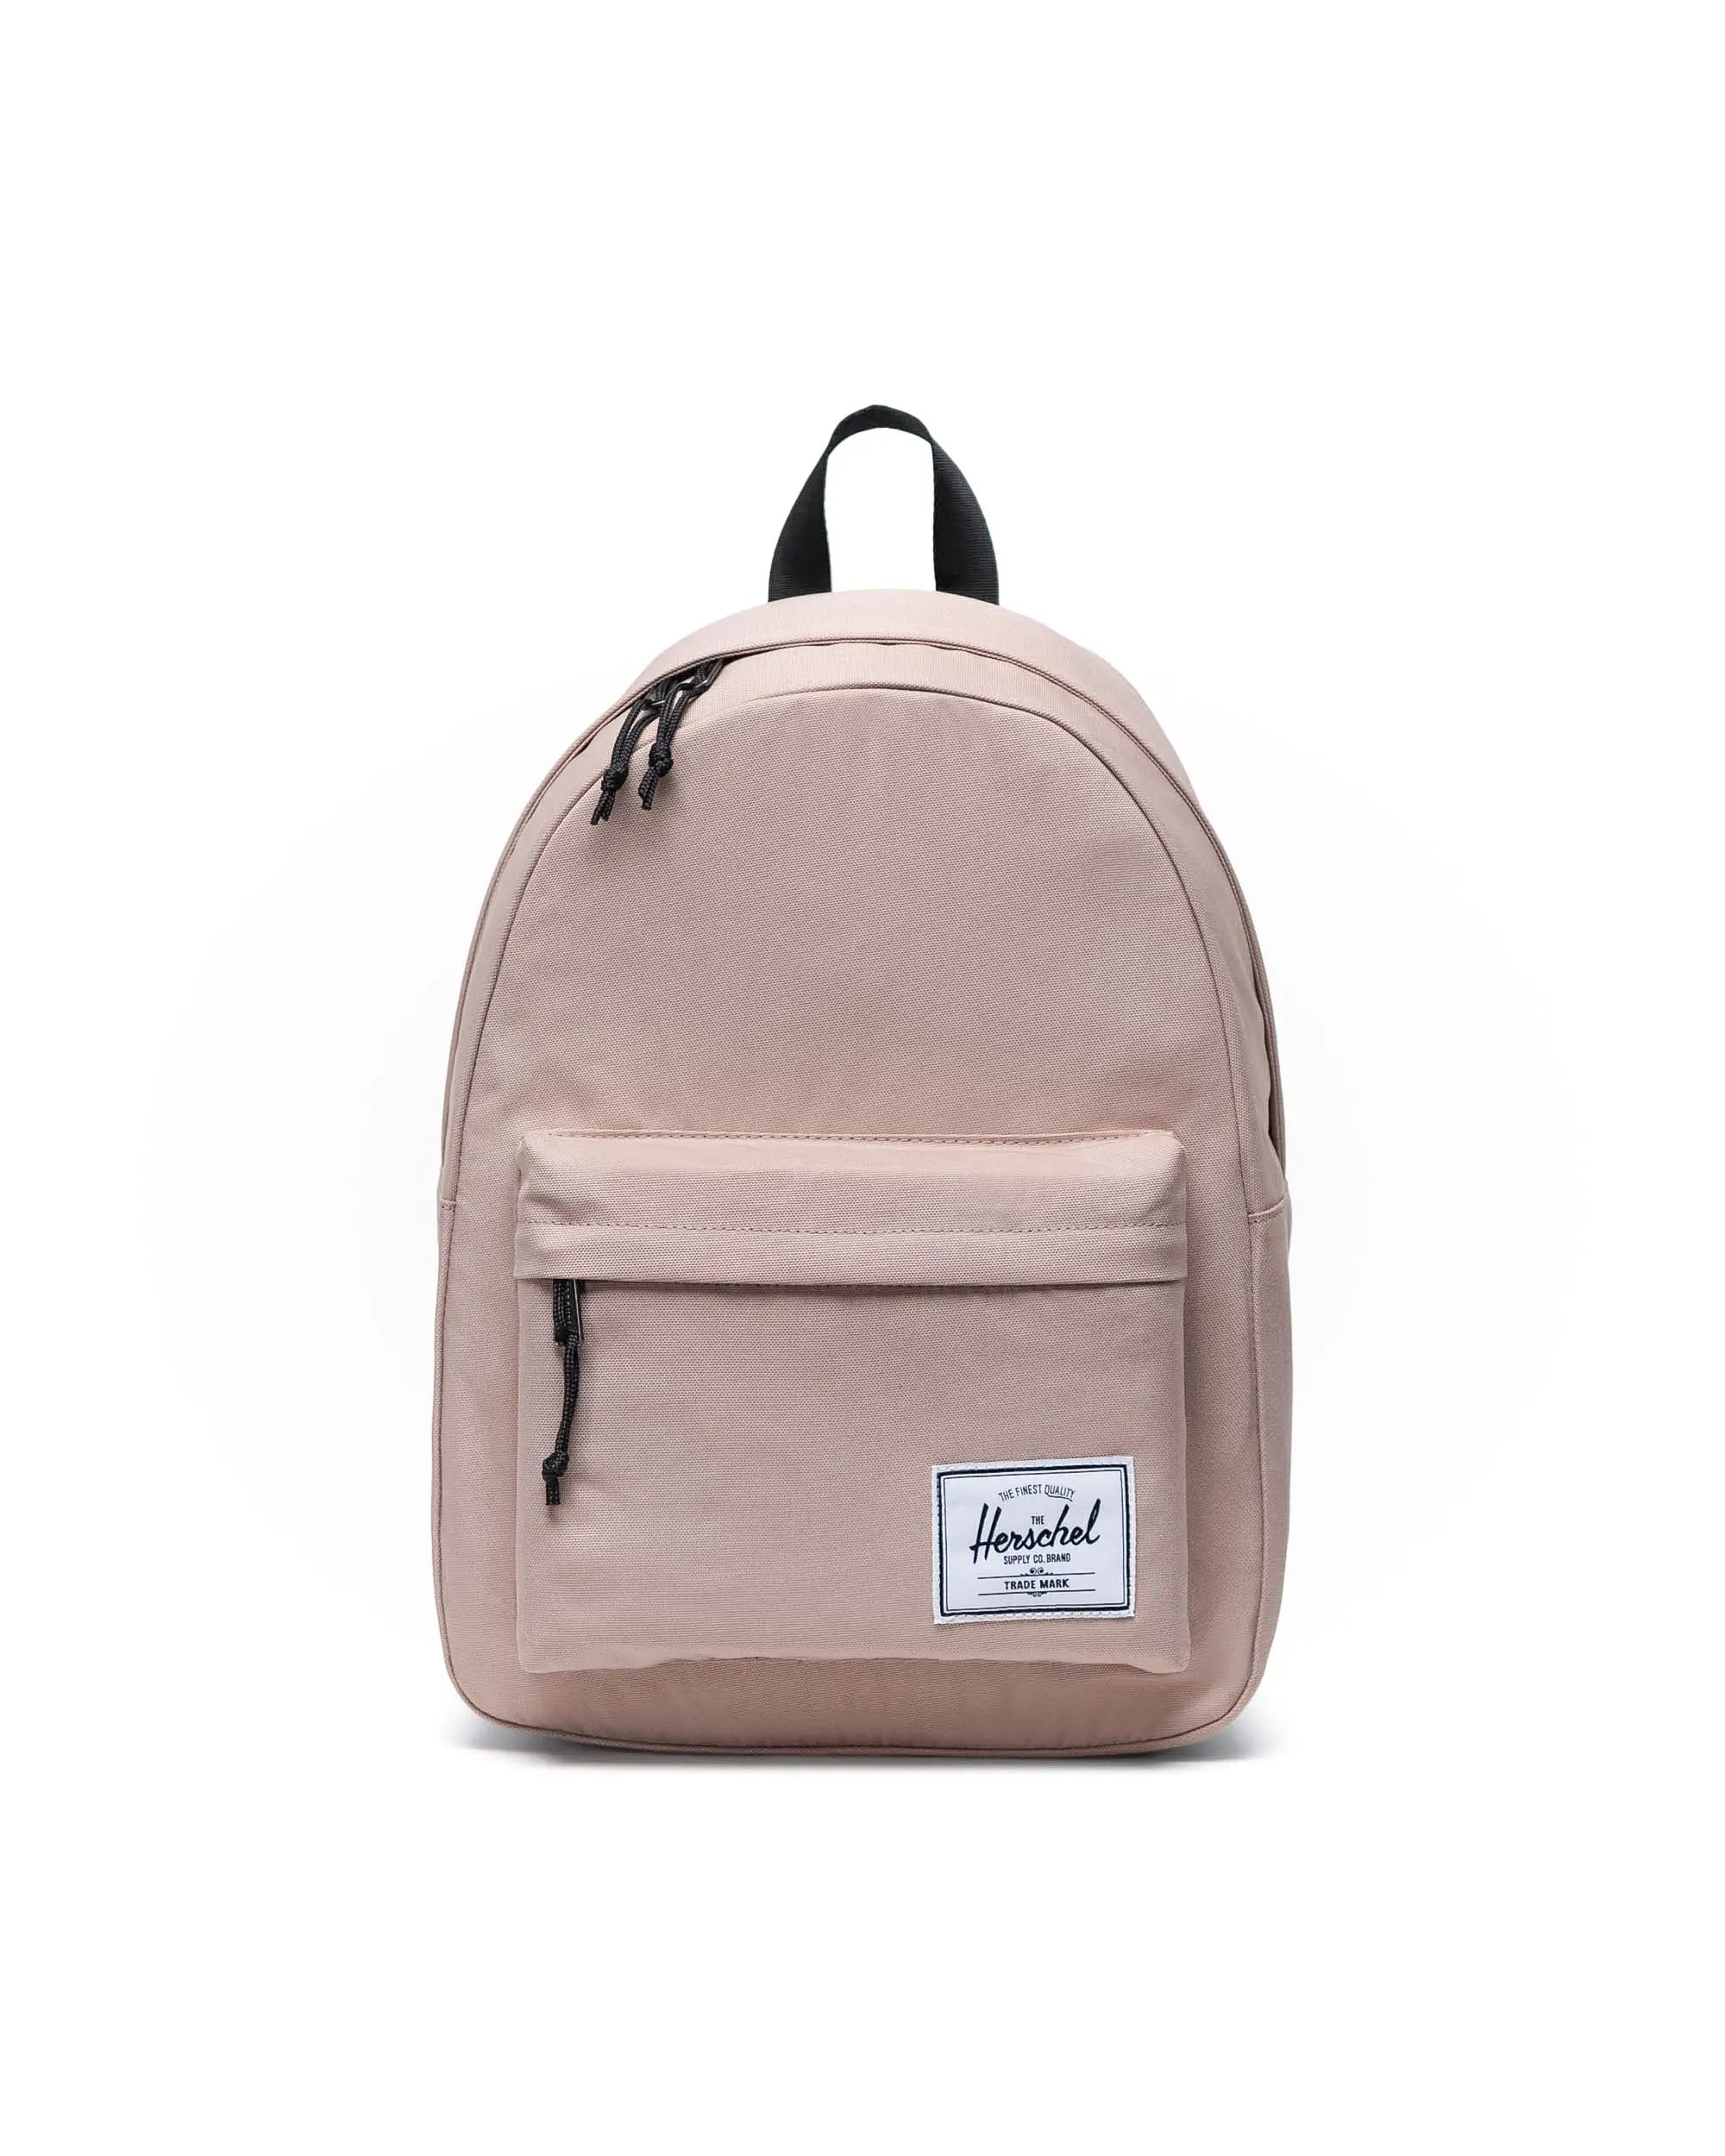 Herschel Classic Backpack - Light Taupe